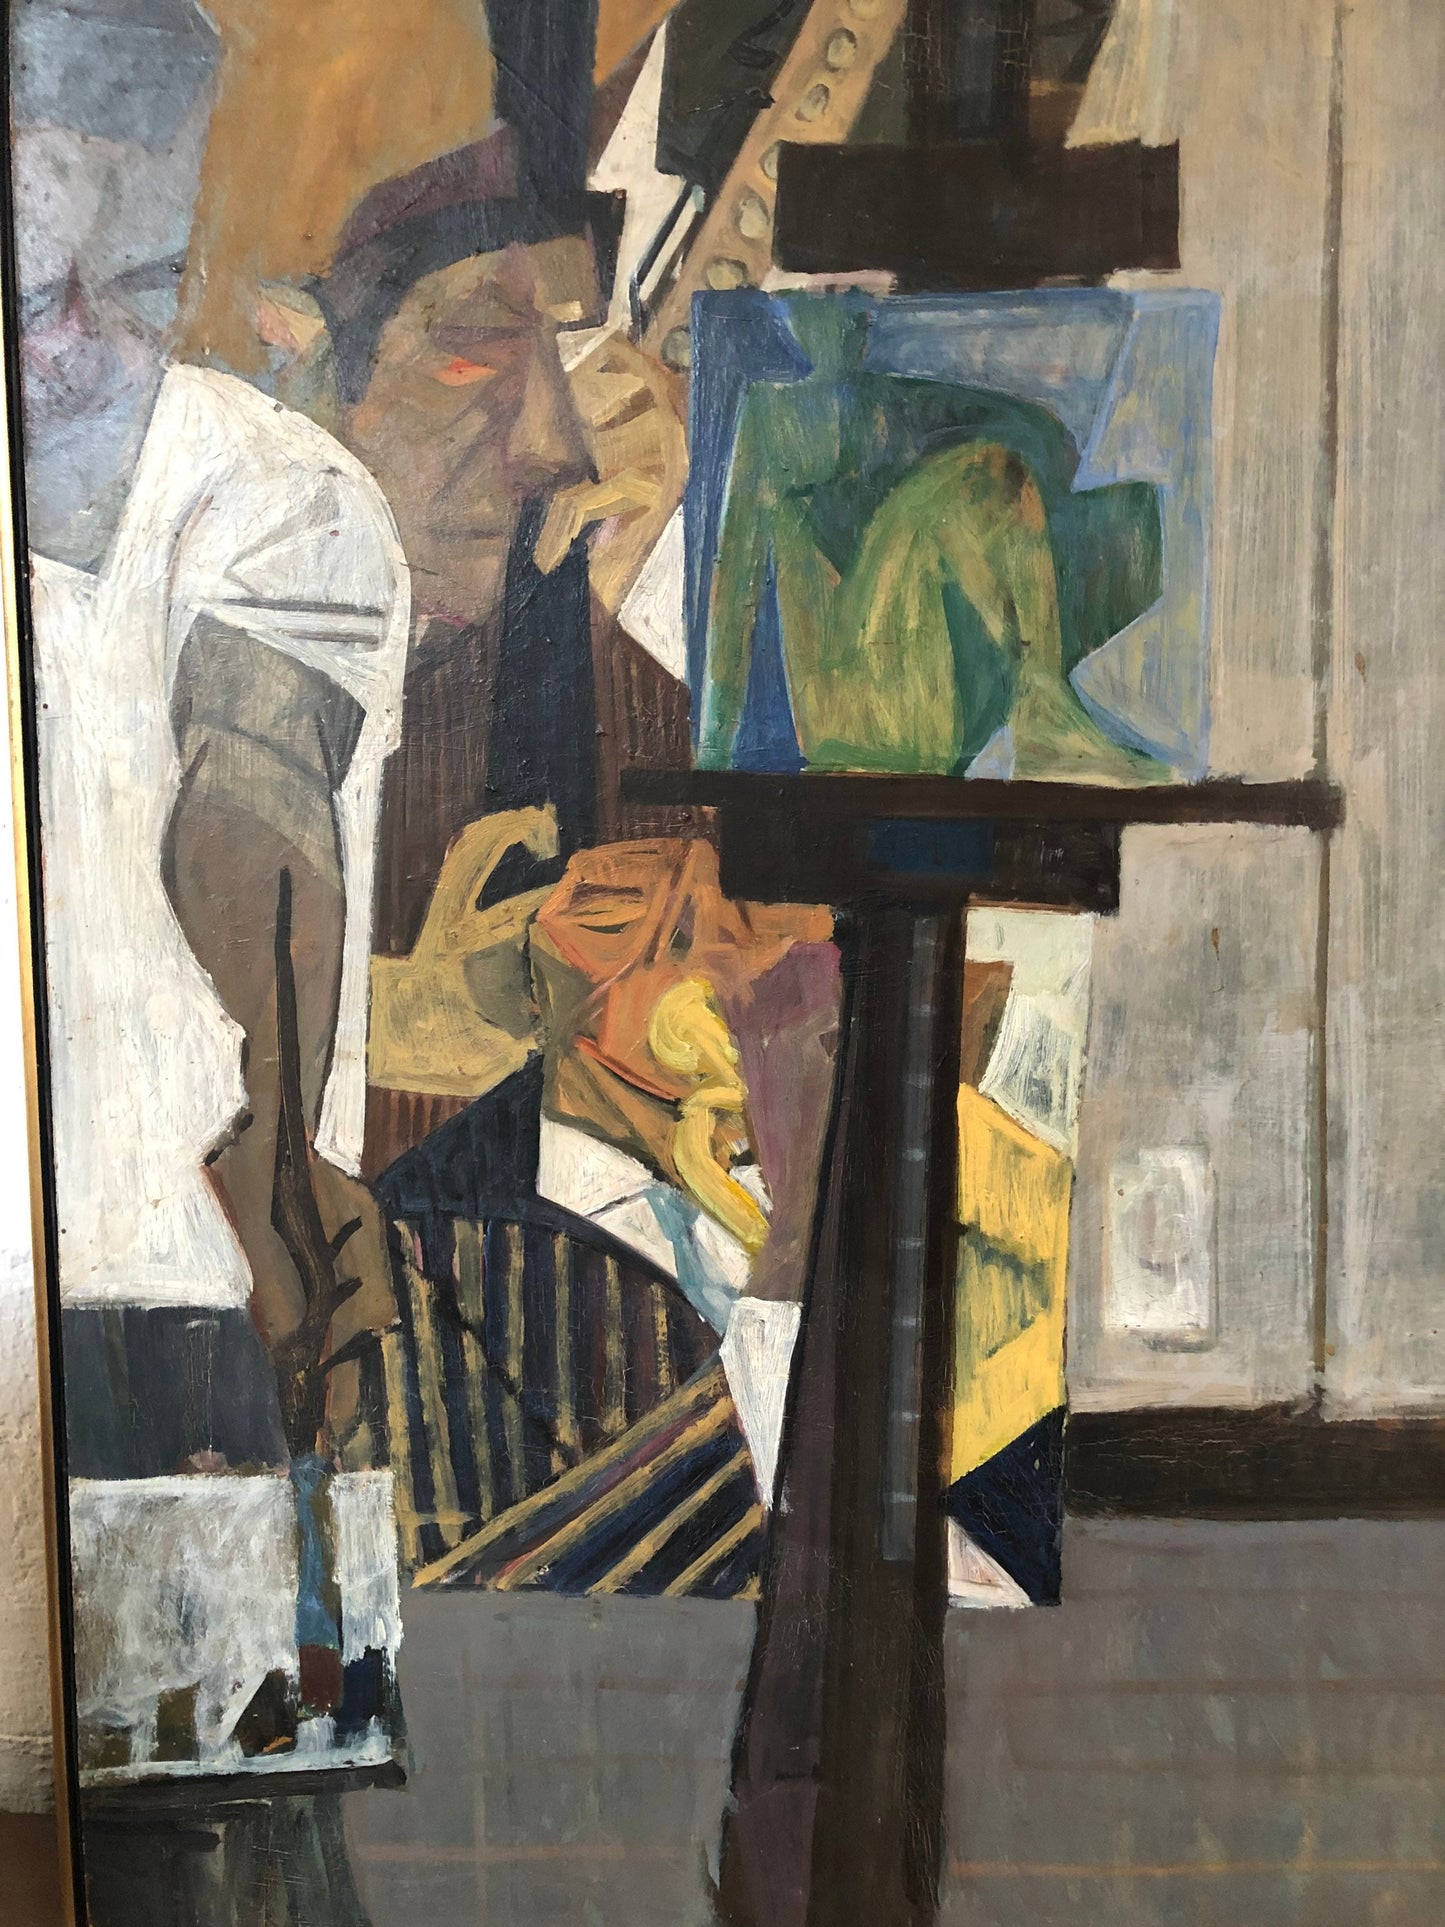 In The Studio painting by Morty Dimondstein